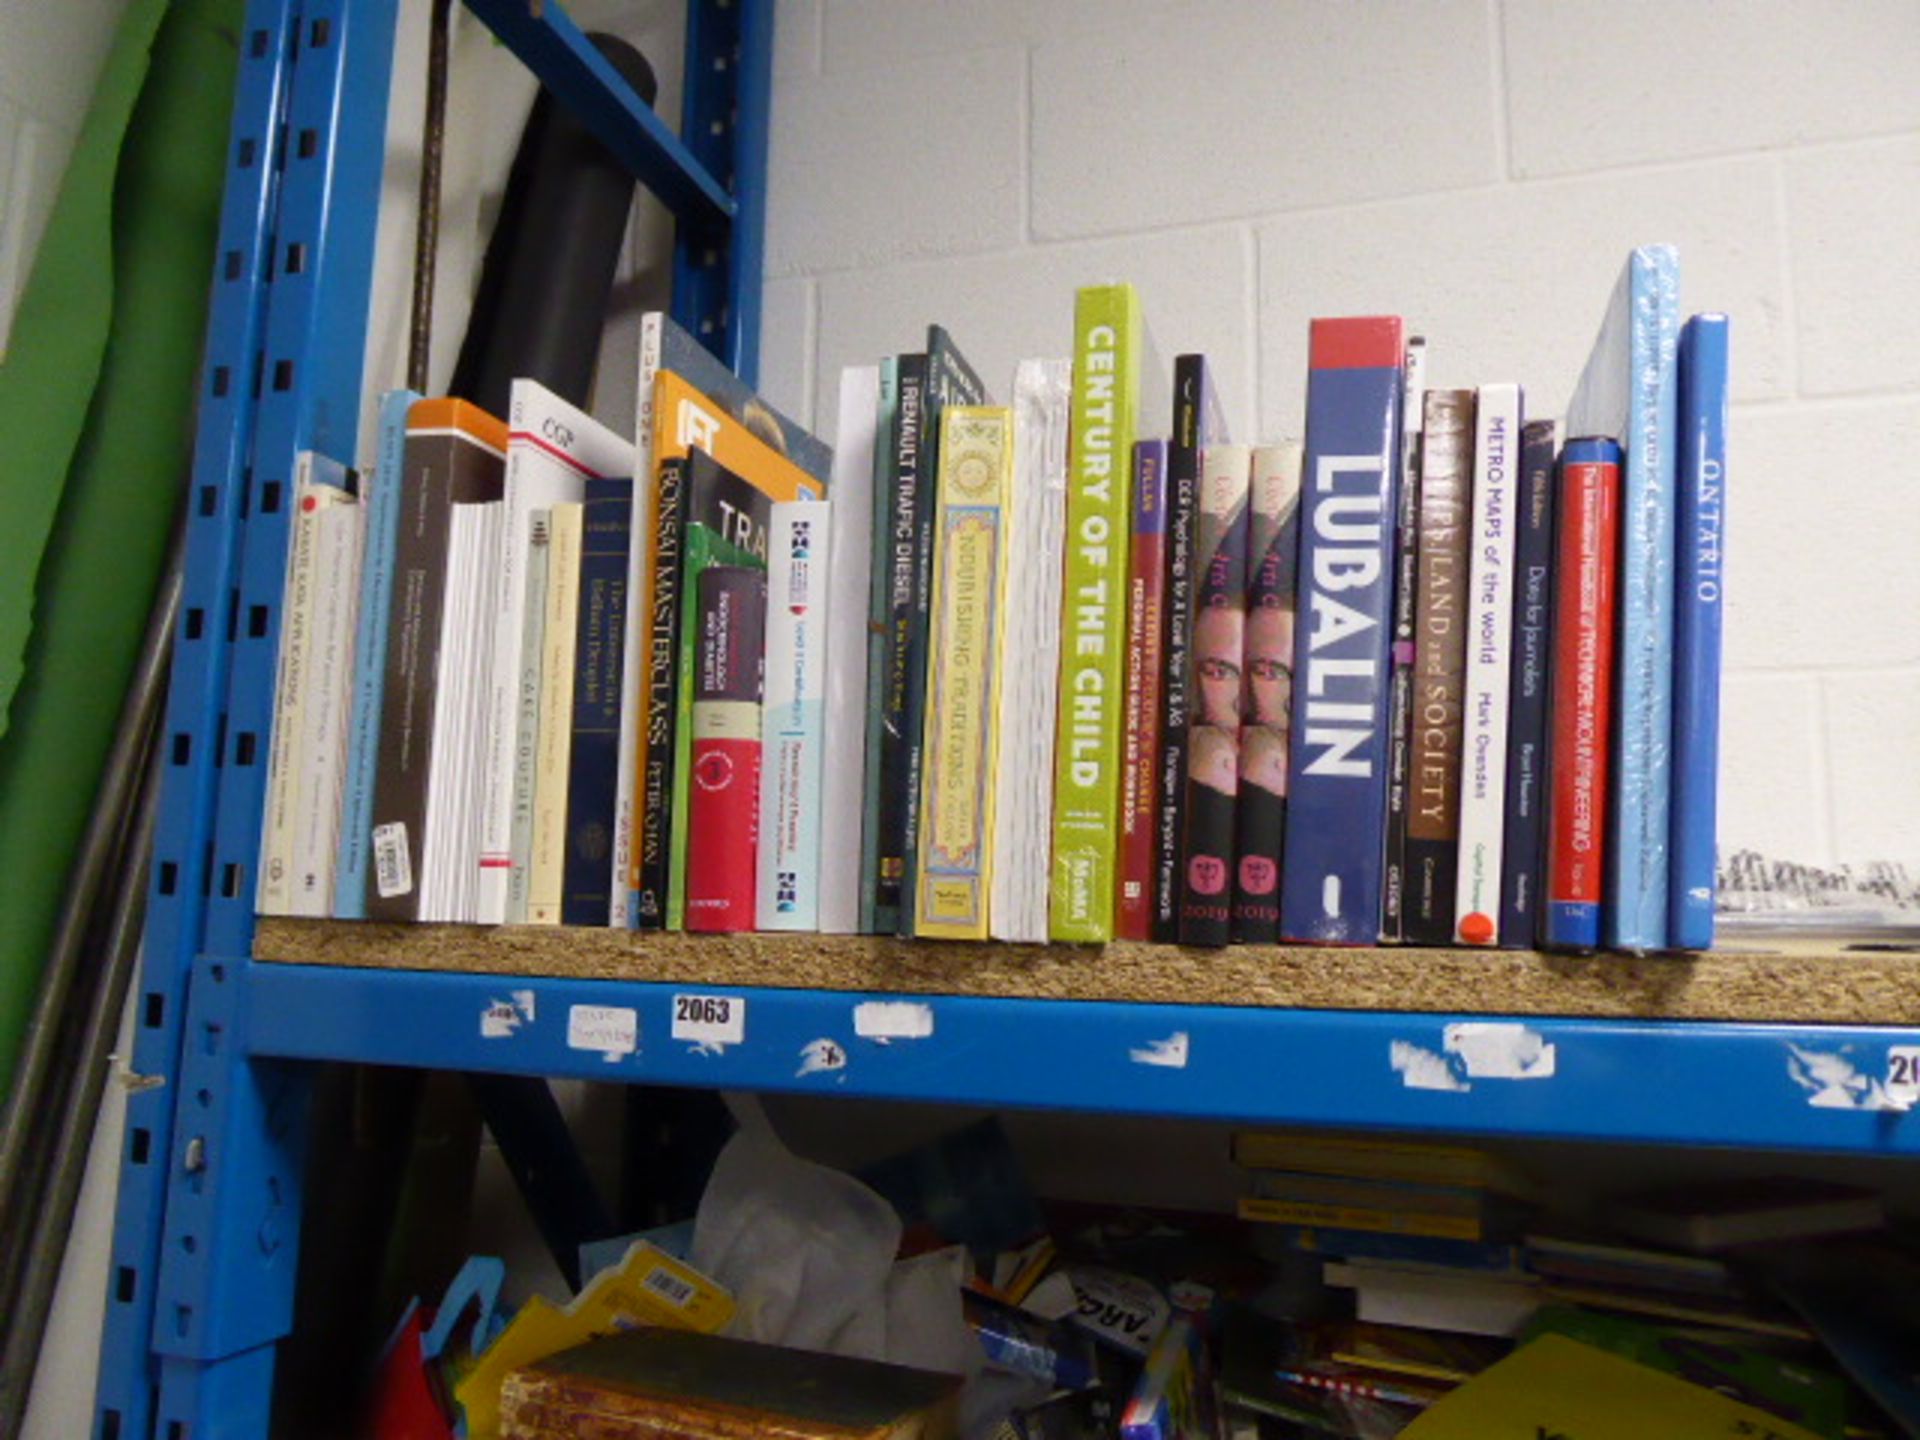 Small part shelf of mixed reference books, study materials etc